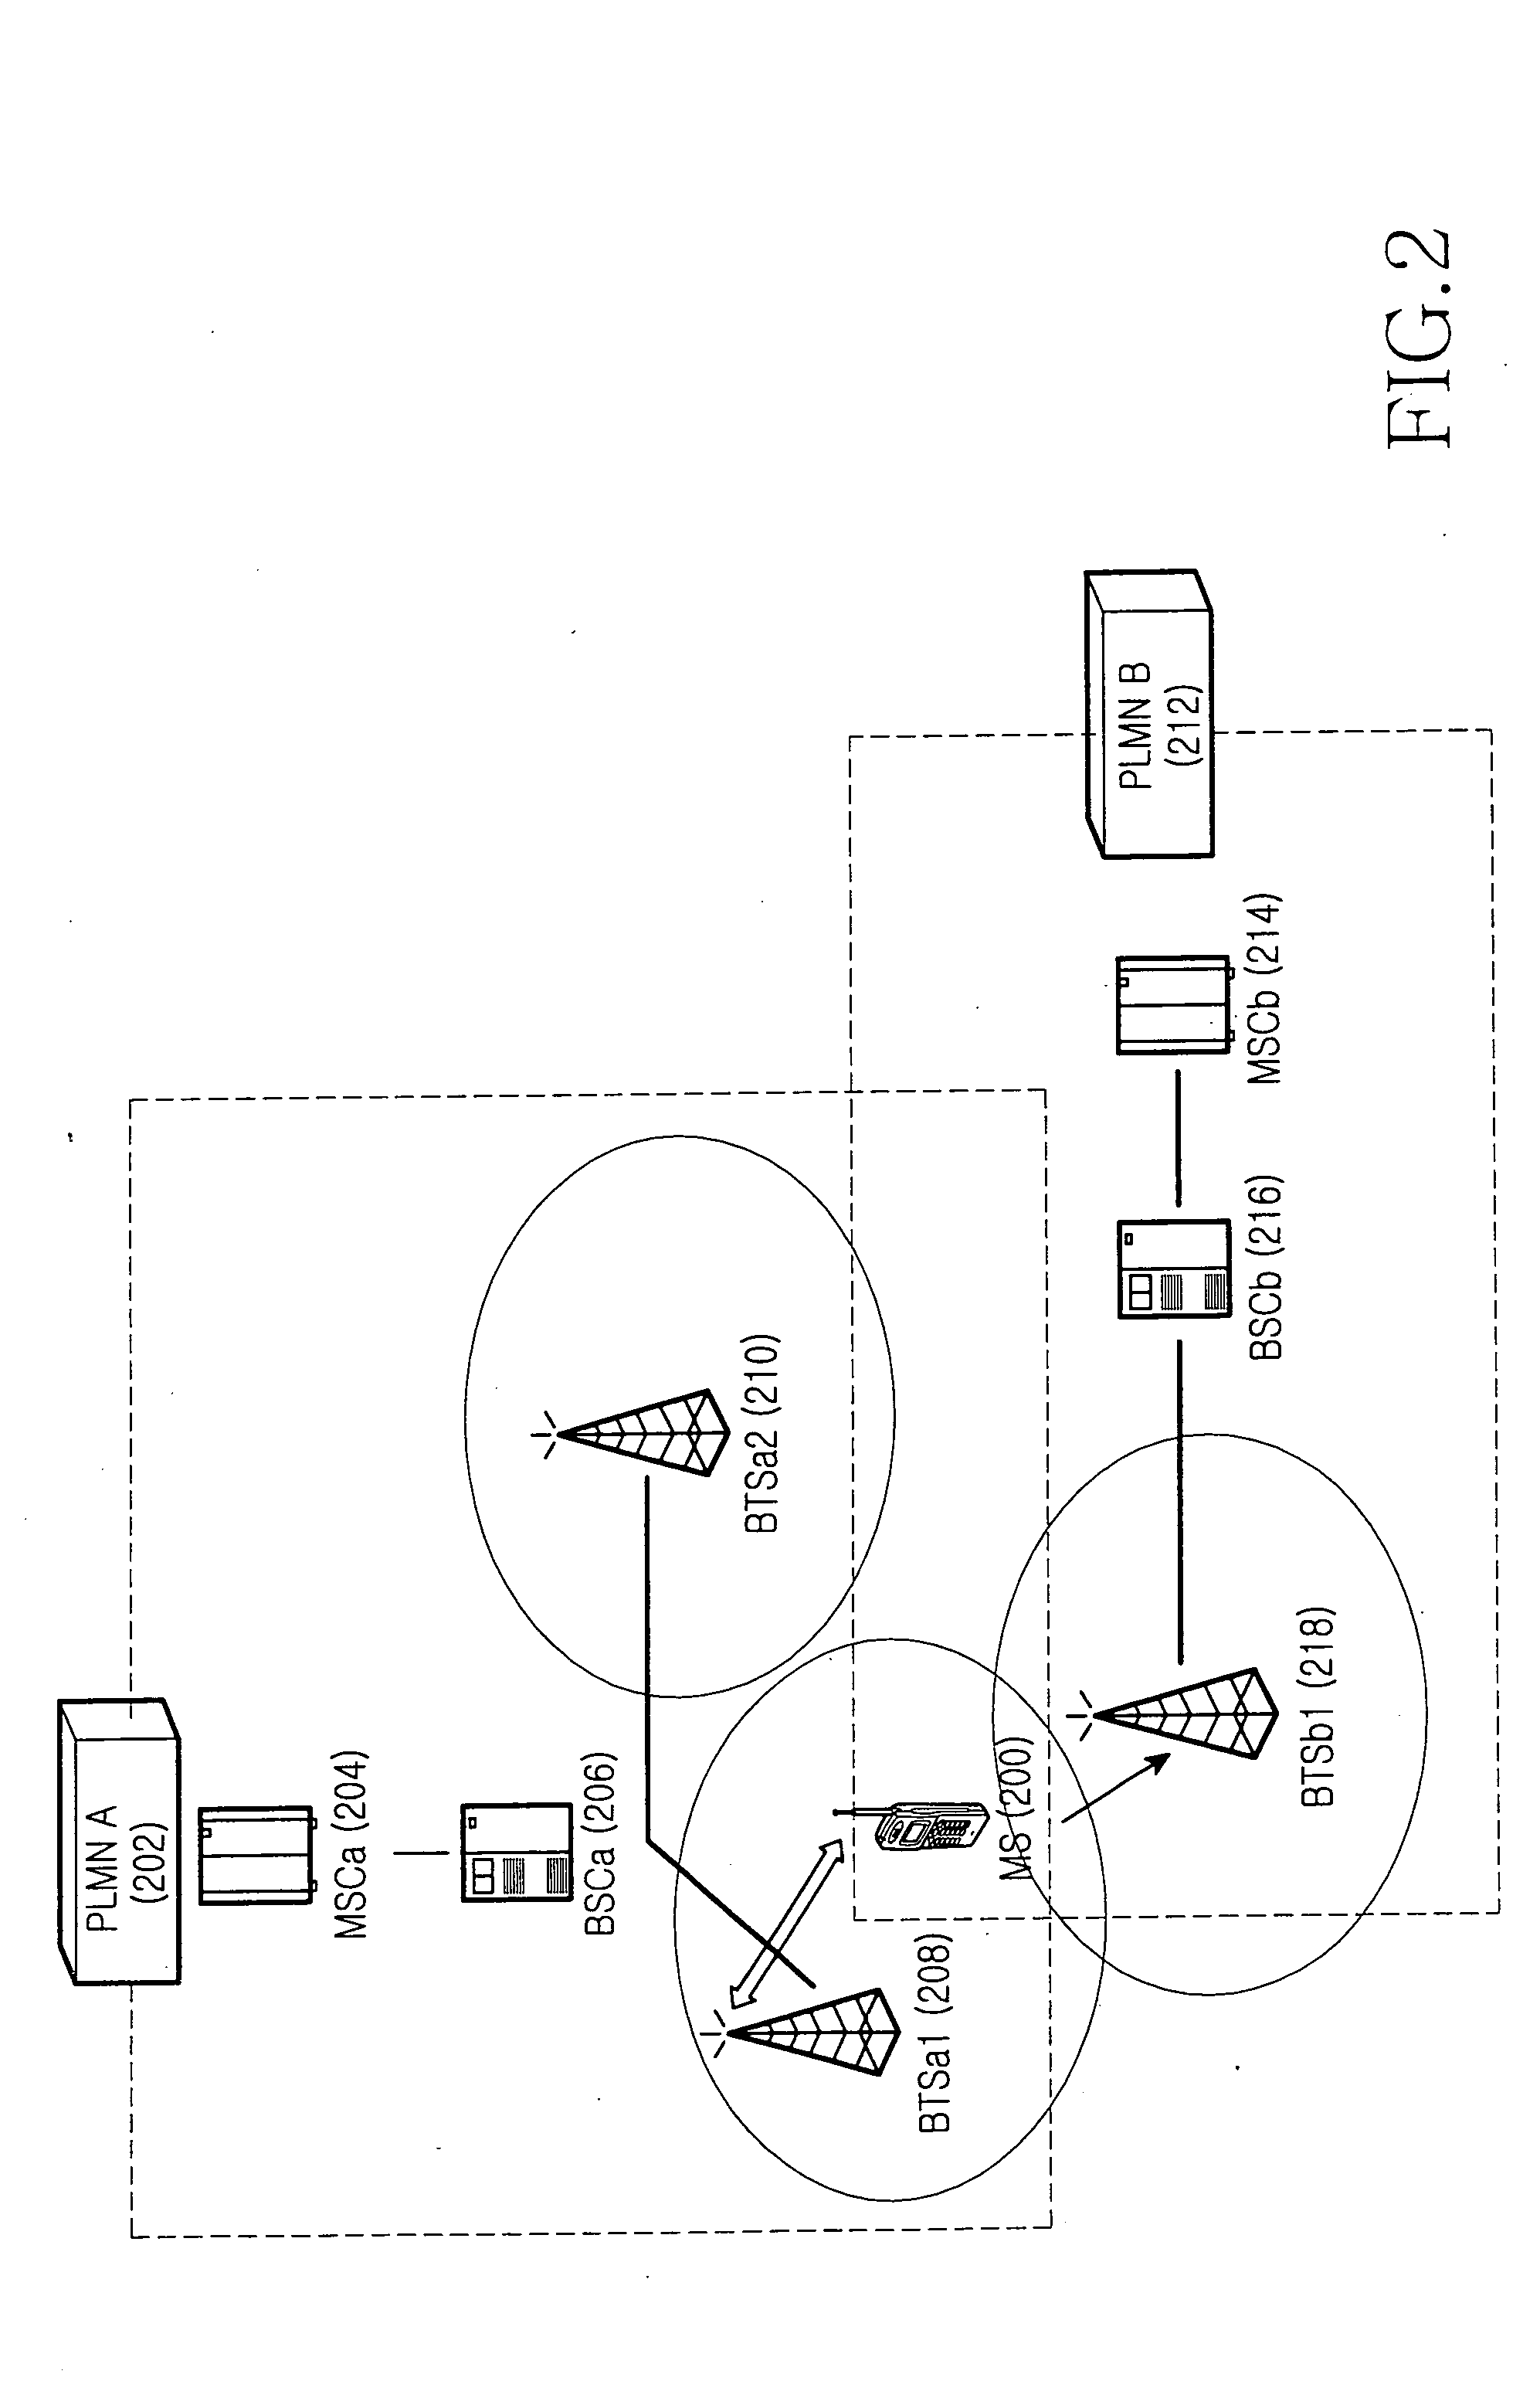 Apparatus and method for receiving improved roaming service in a mobile terminal